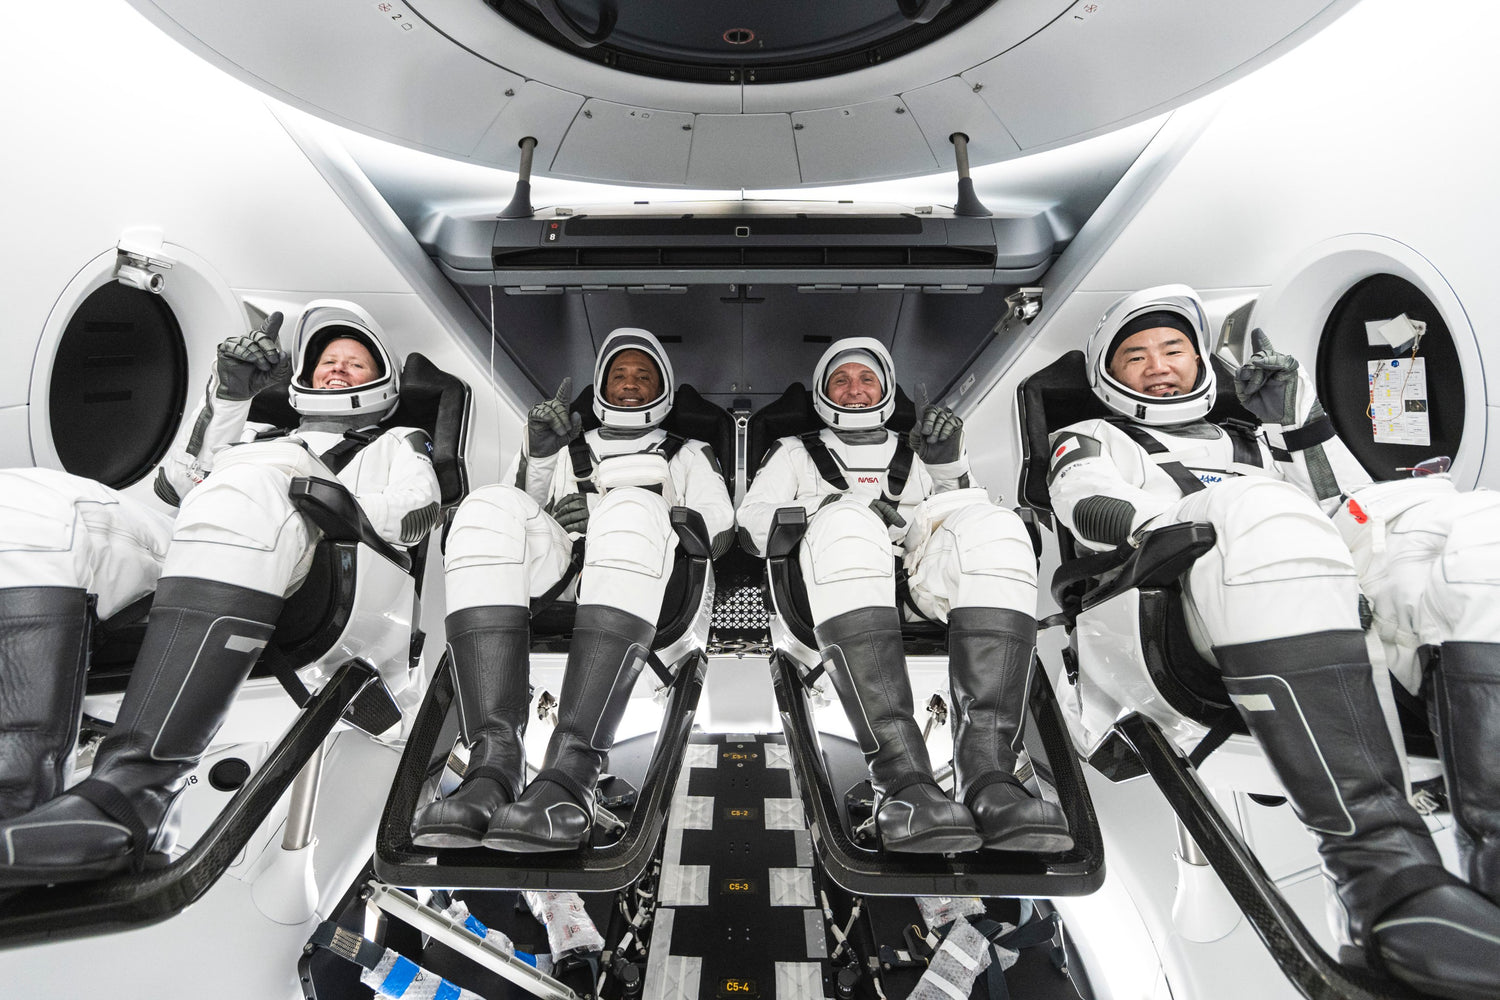 SpaceX Crew-1 Astronauts At The Space Station Will Return Aboard Crew Dragon On Wednesday